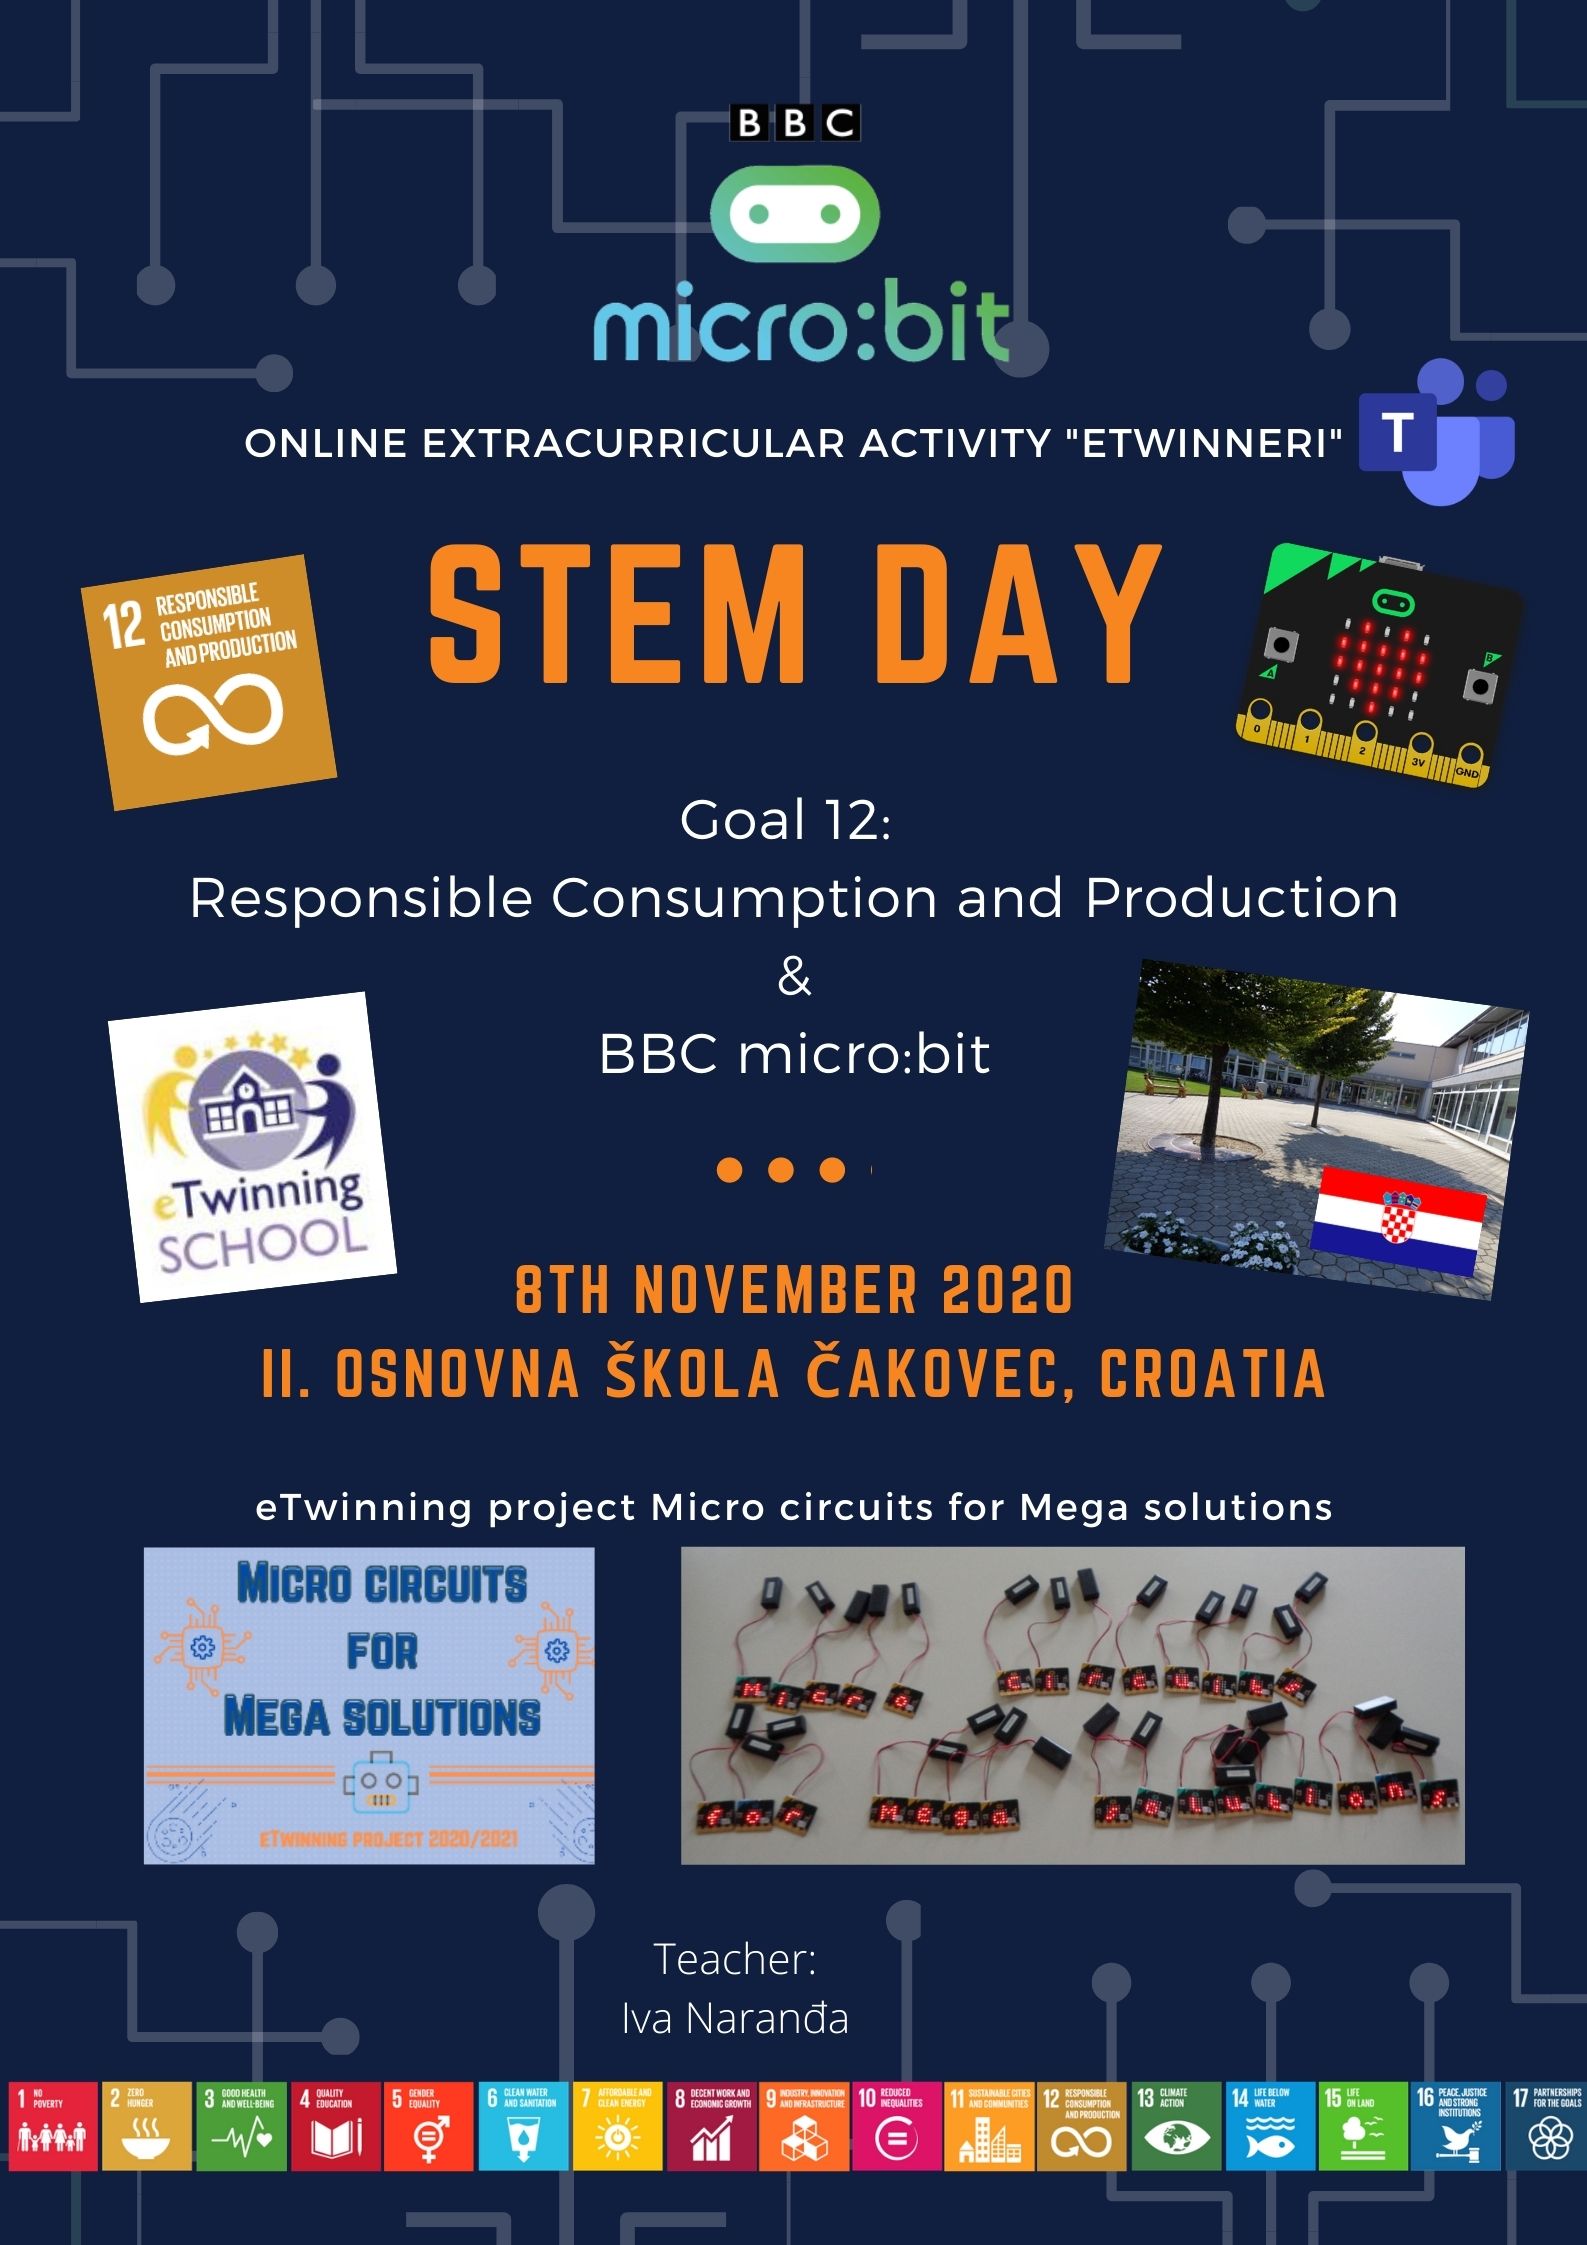 STEM DAY - eTwinning project Micro circuits for Mega solutions